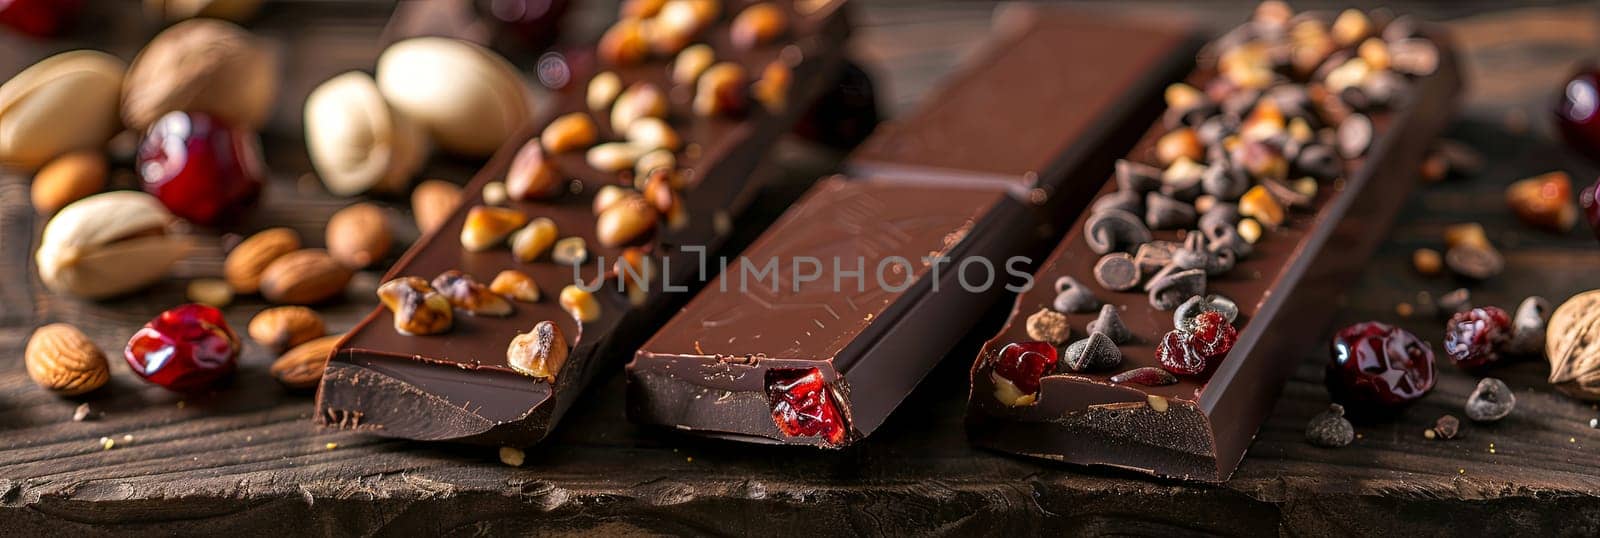 Detailed close-up view of a chocolate bar filled with nuts, showcasing rich textures and natural ingredients.